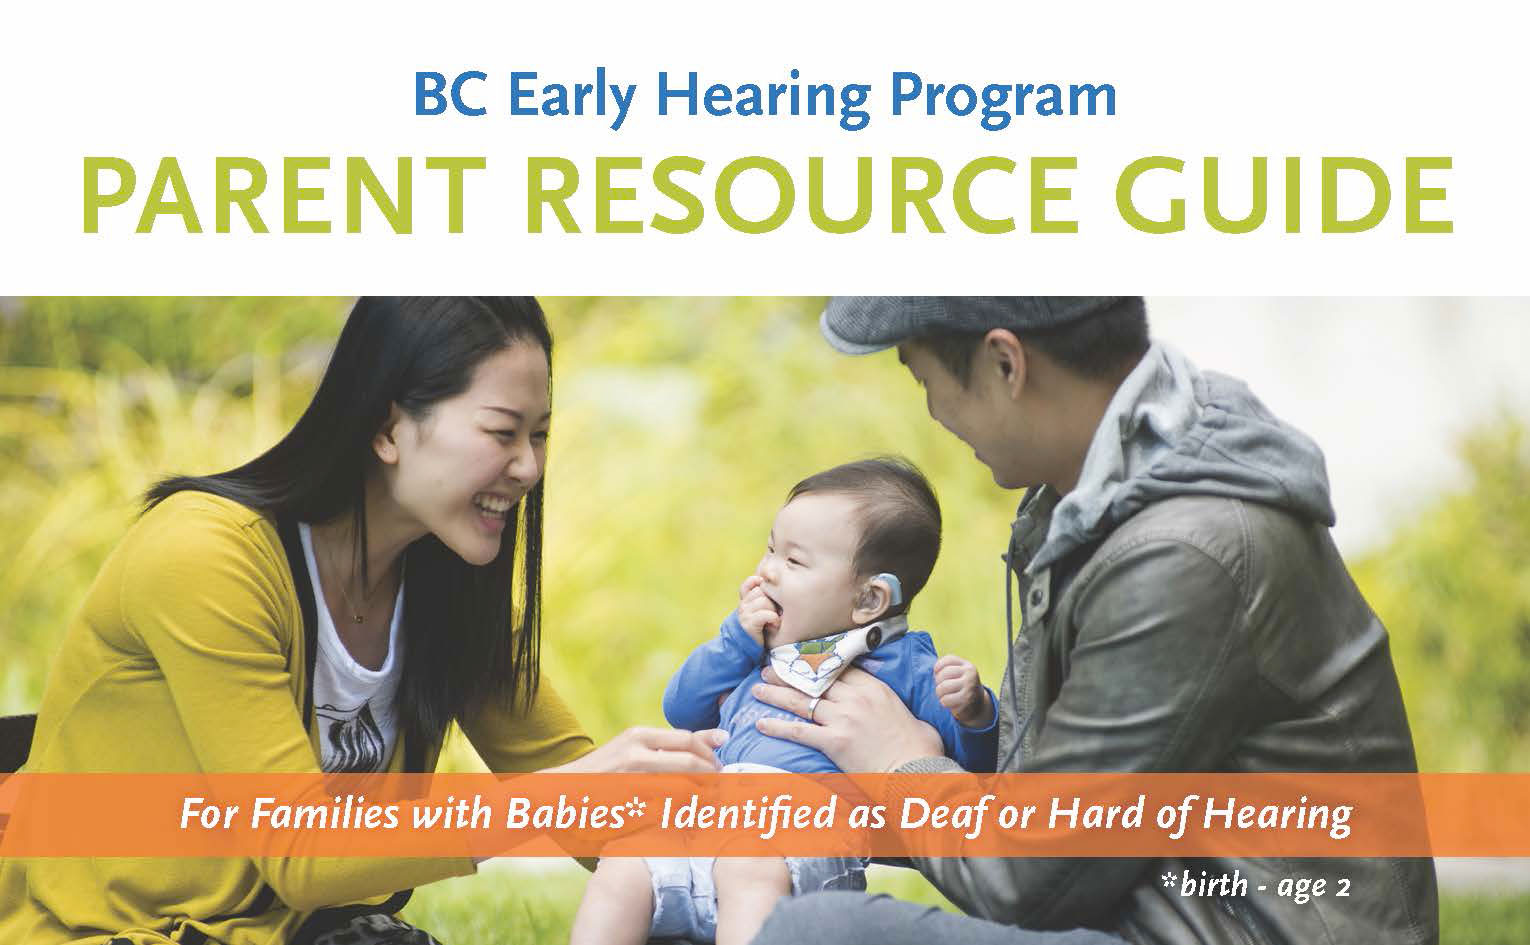 BC Early Hearing Program Parent Resource Guide for families with babies identified as deaf or hard of hearing